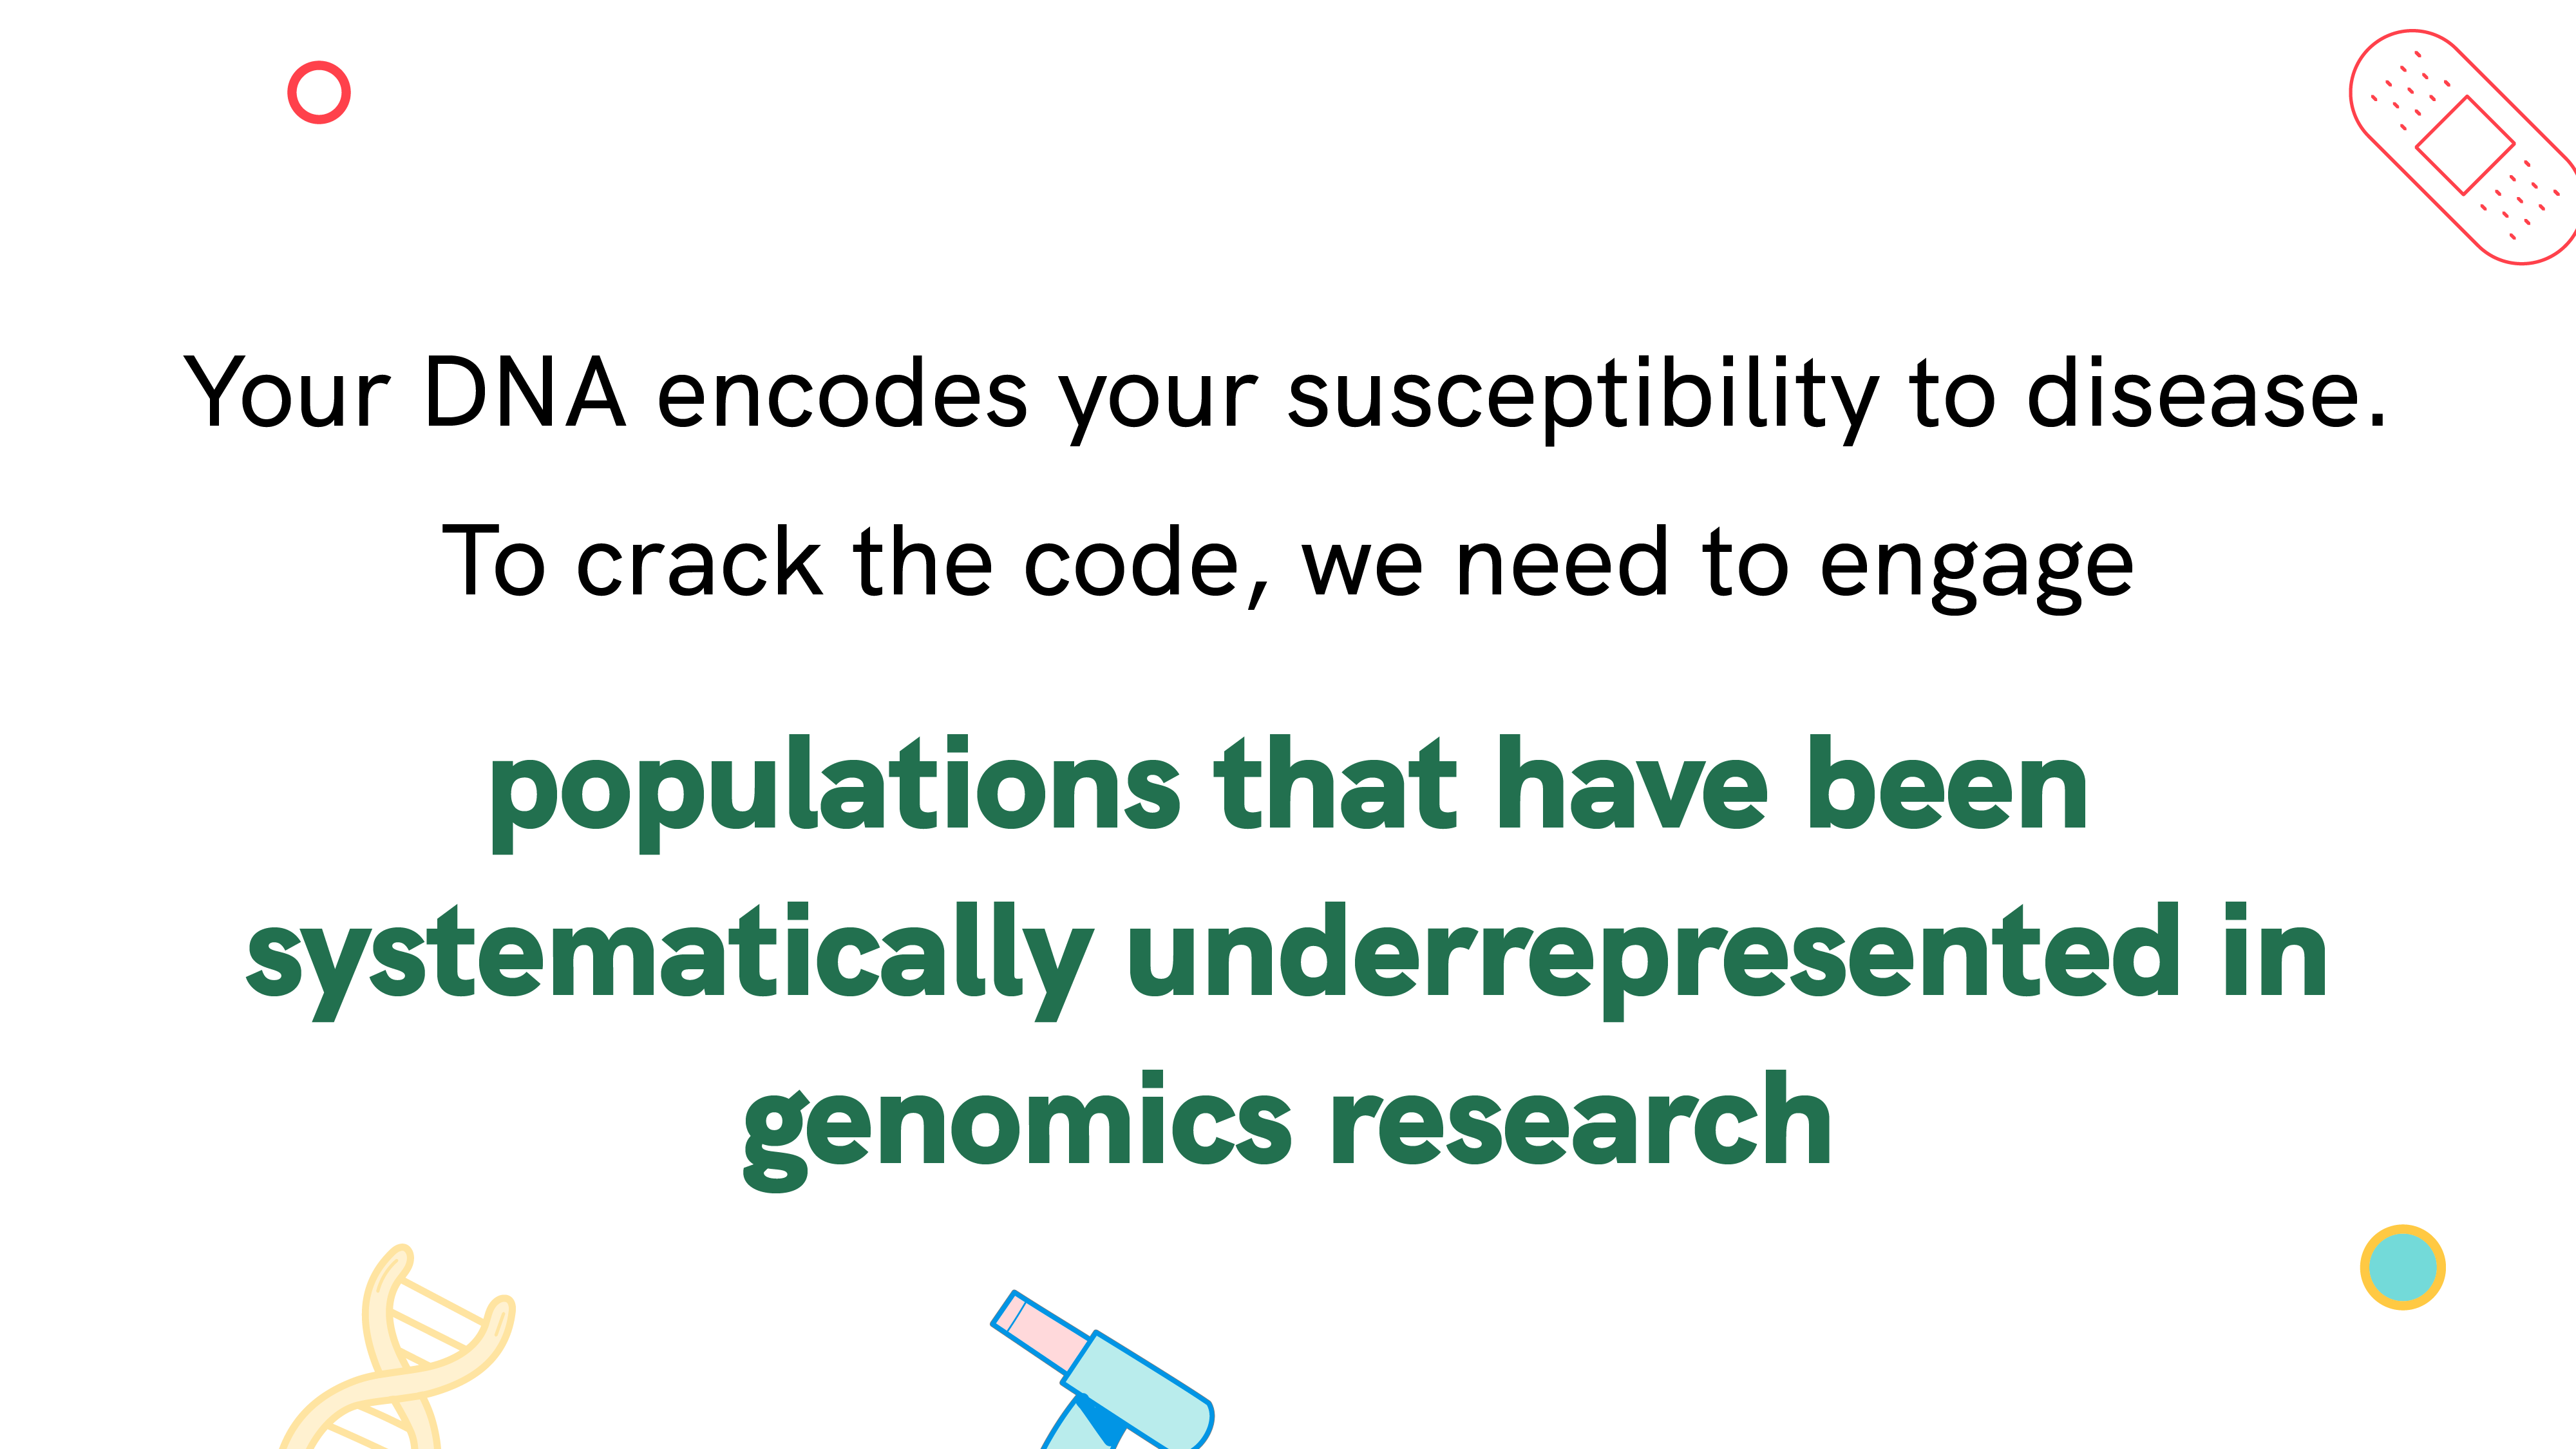 Your DNA encodes your susceptibility to disease. To crack the code, we need to engage populations that have been systematically underrepresented in genomics research